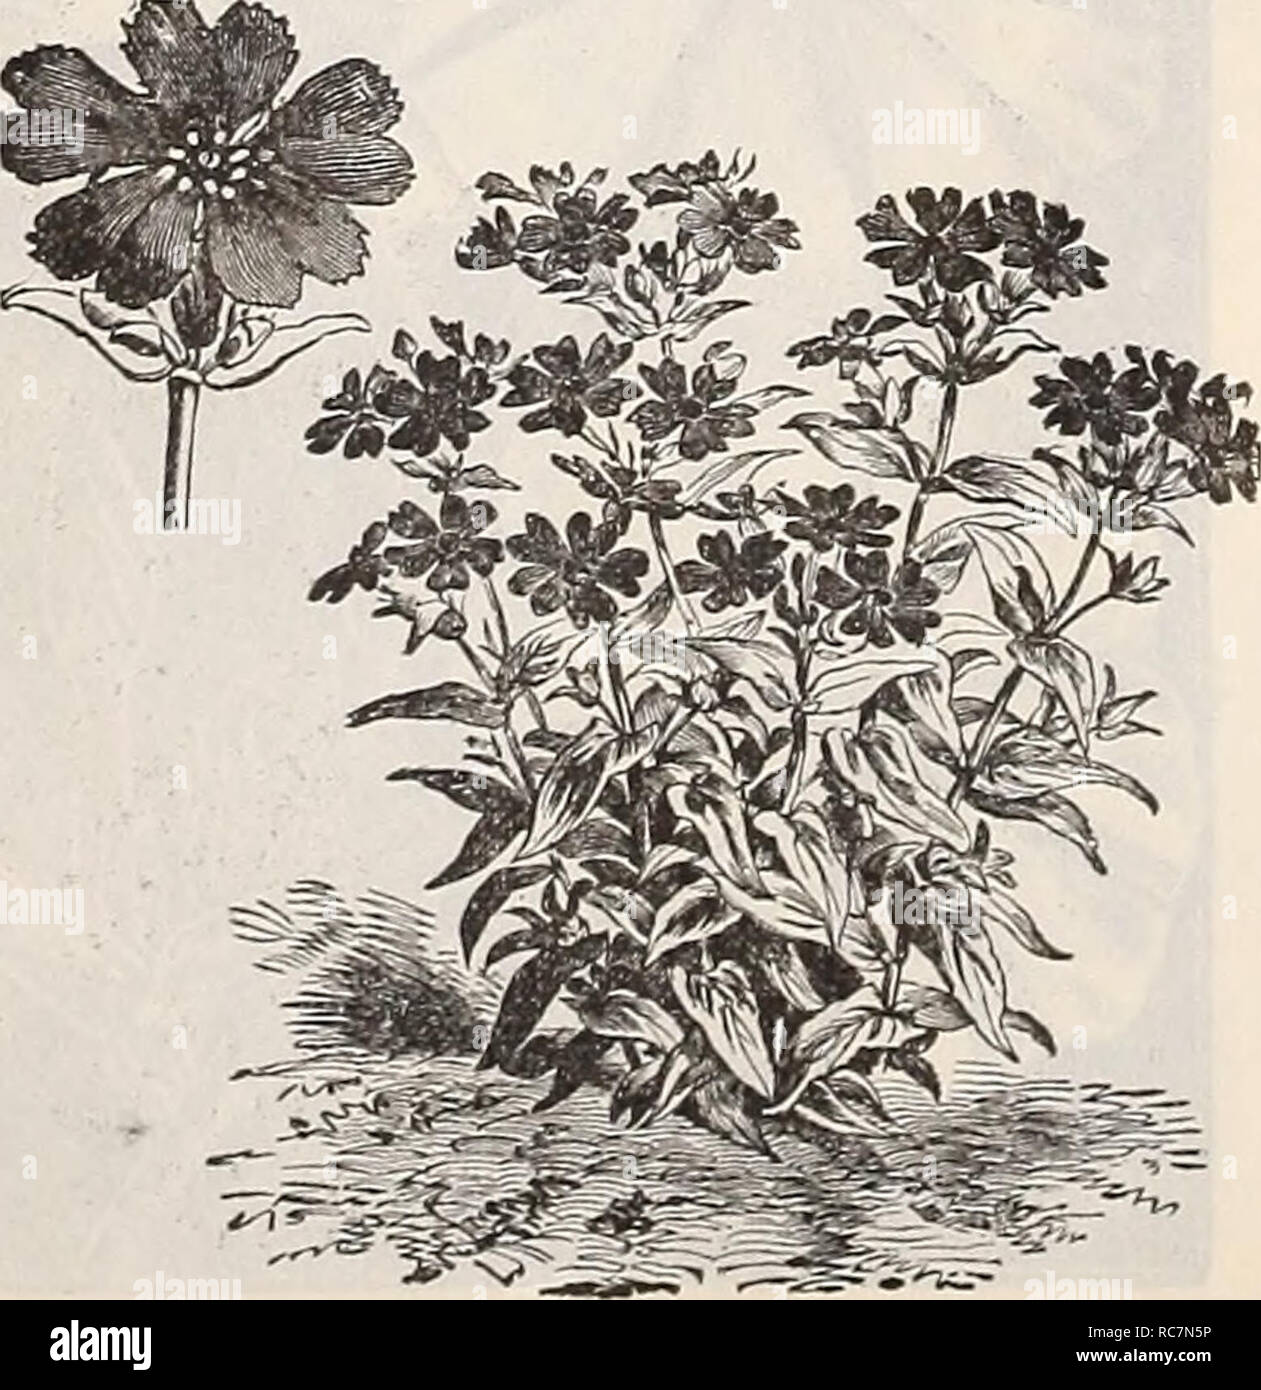 . Dreer's garden calendar : 1899. Seeds Catalogs; Nursery stock Catalogs; Gardening Equipment and supplies Catalogs; Flowers Seeds Catalogs; Vegetables Seeds Catalogs; Fruit Seeds Catalogs. Lantana. LmXTM. One of the most effective and showy bedding plants of long duration, having tine foliage and delicate stems. PER pkt. 6017 Linum Coccineum. (Scarlet Flax.) Brilliant scarlet crimson ; hardy annual ; 1 foot 5 601 â ;&quot; â Flavum. Golden-yellow; per- ennial 5 LOPHOSPERMIM. Highly ornamental annual climber, with showy foxglove-like flowers; 10 feet. 0035 Lophospermum Scandens. Rosy purple ,, Stock Photo